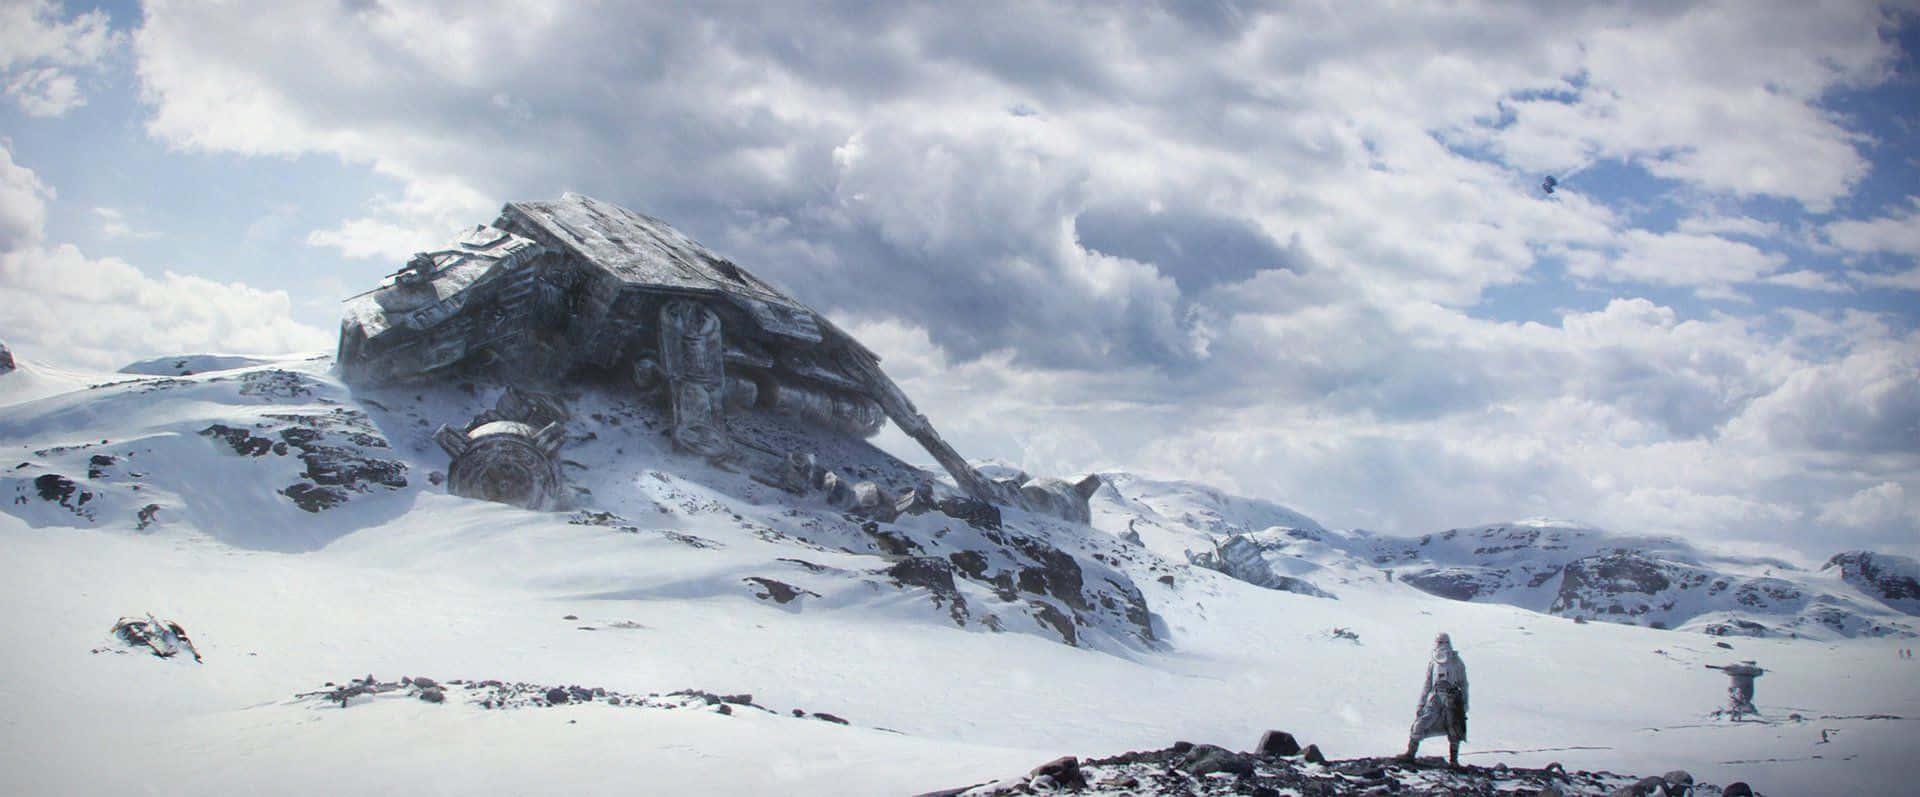 Breathtaking View of the Snowy Mountains on Planet Hoth Wallpaper